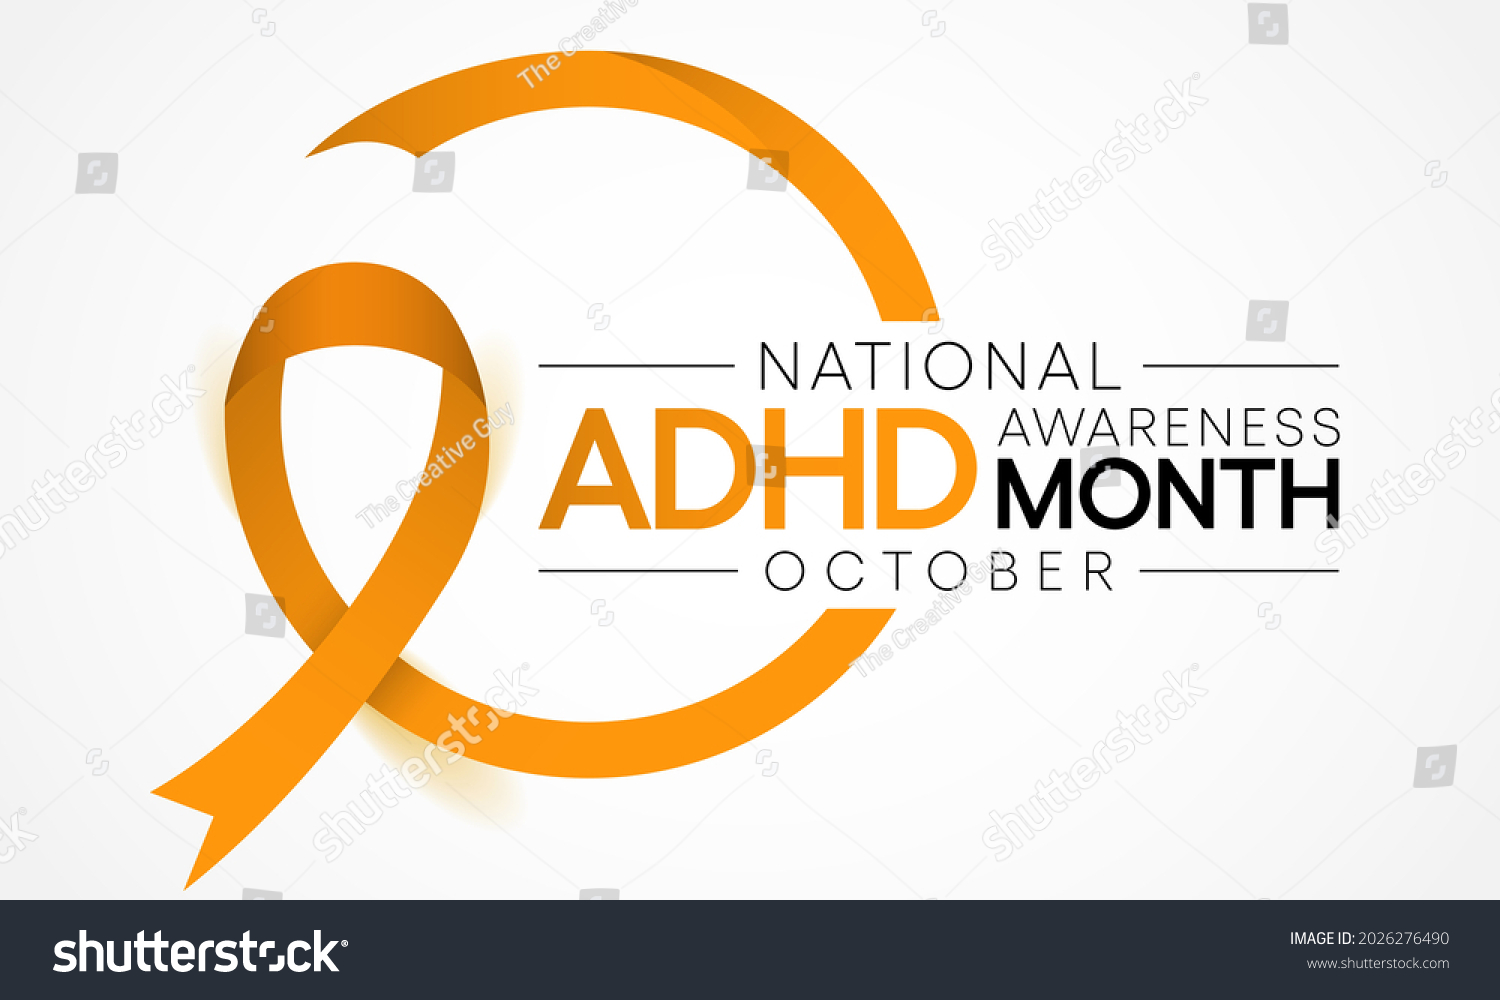 National Adhd Awareness Month Observed Every Stock Vector Royalty Free 2026276490 Shutterstock 2905